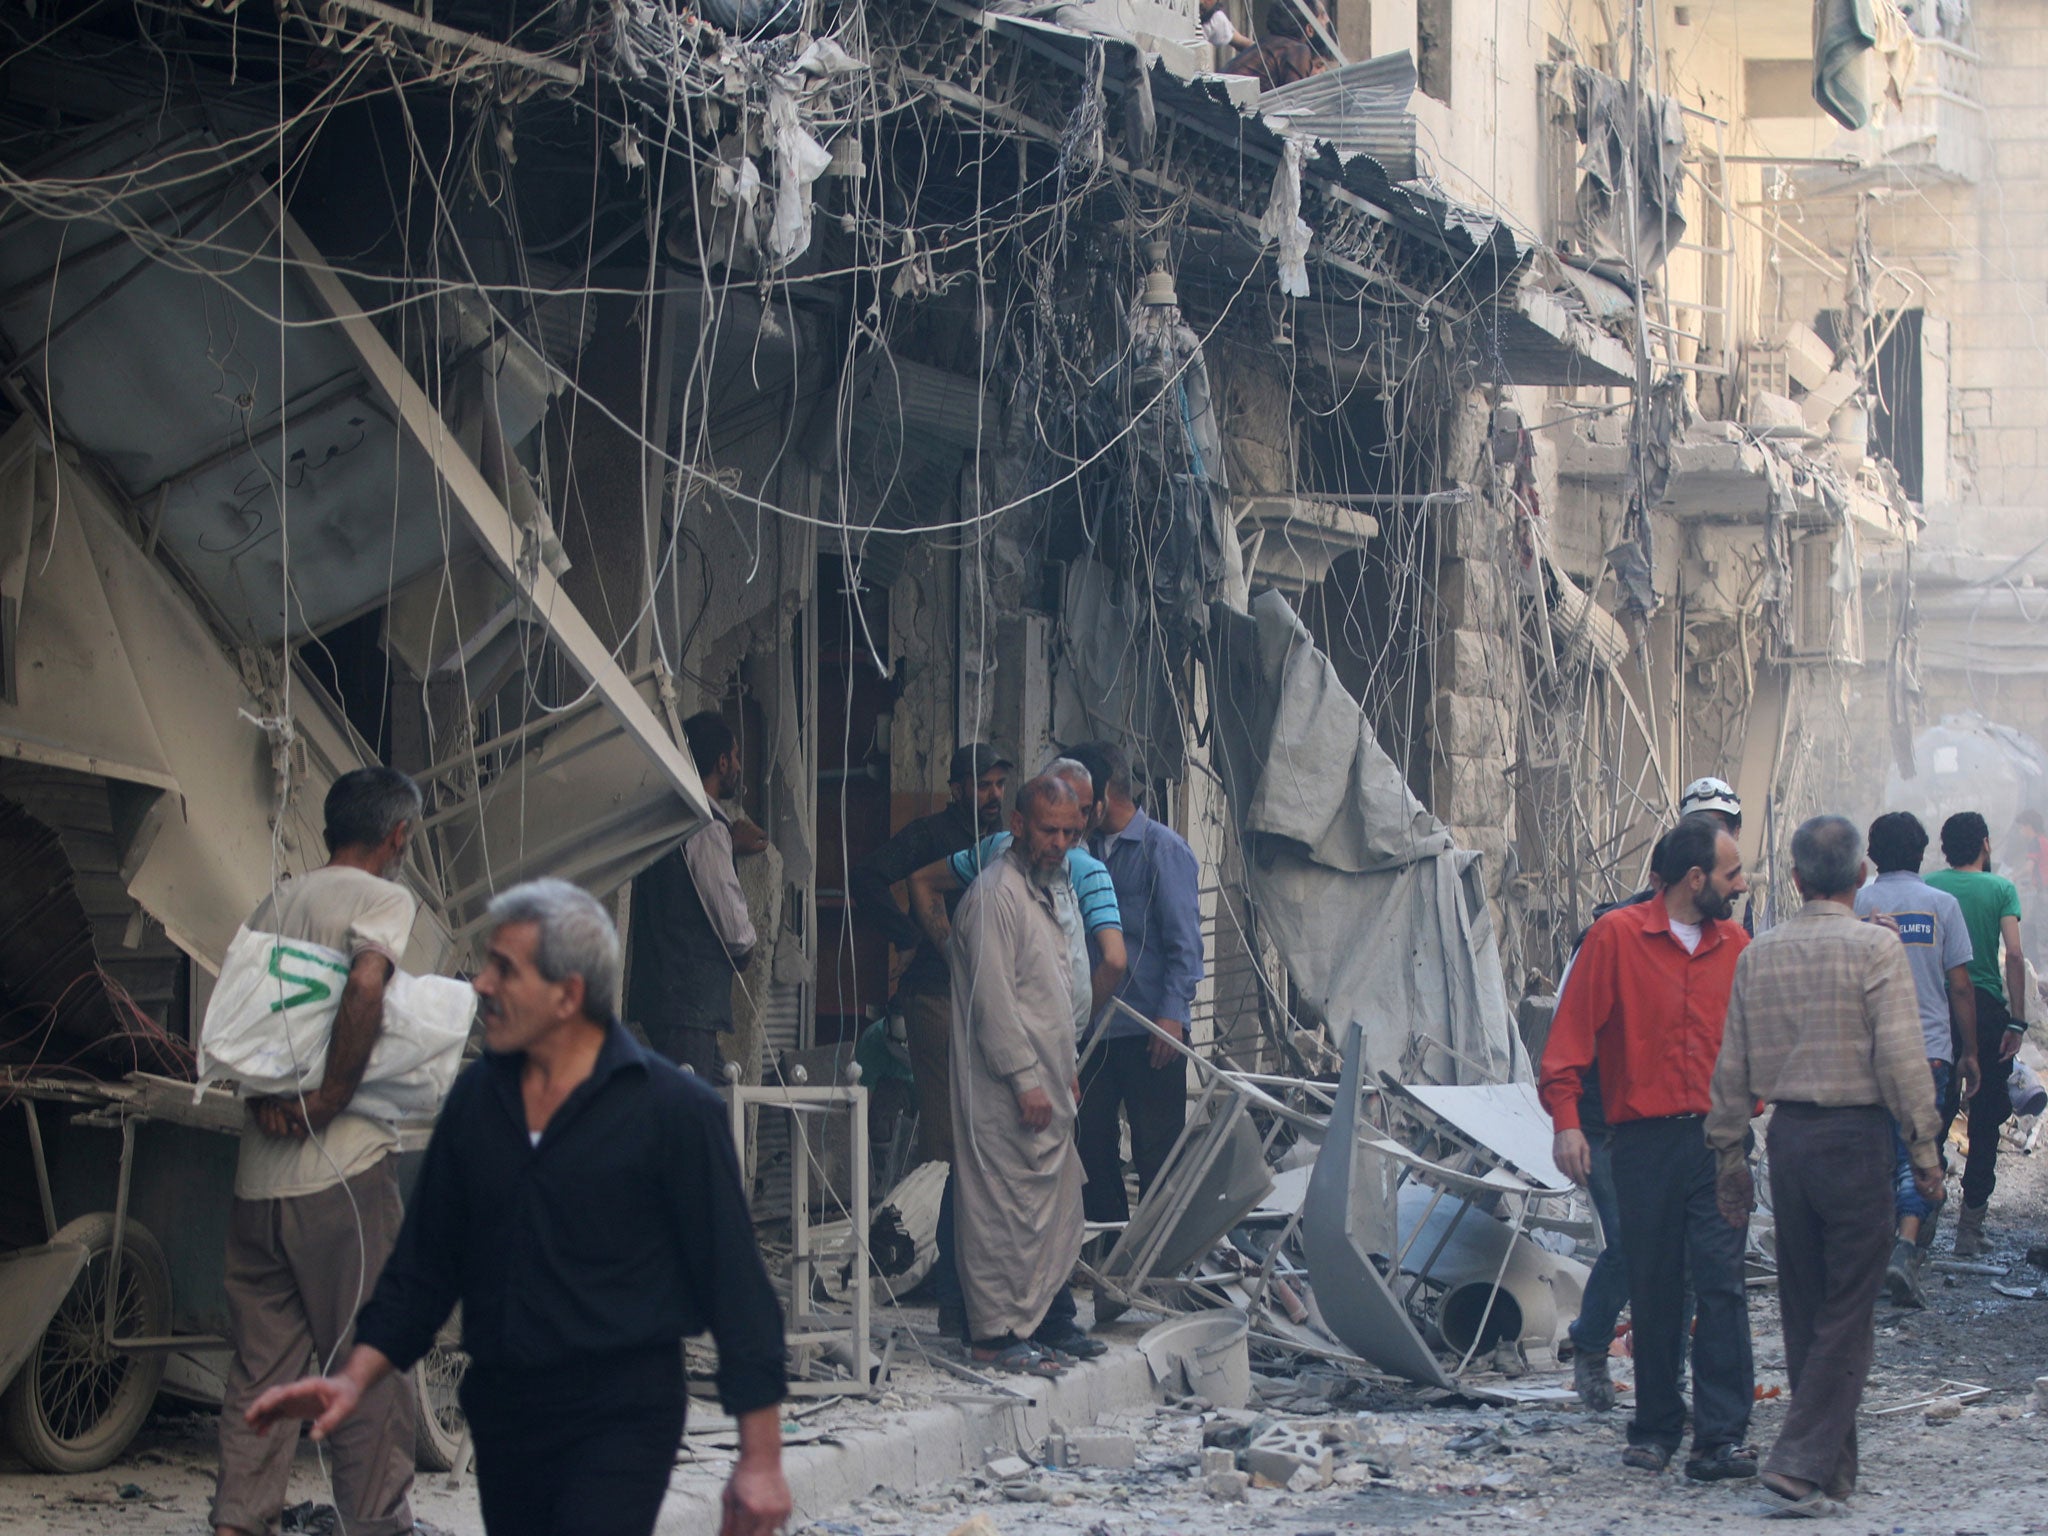 Civil defence members and men inspect a site damaged after an airstrike in the besieged rebel-held al-Qaterji neighbourhood of Aleppo, Syria, 11 October, 2016